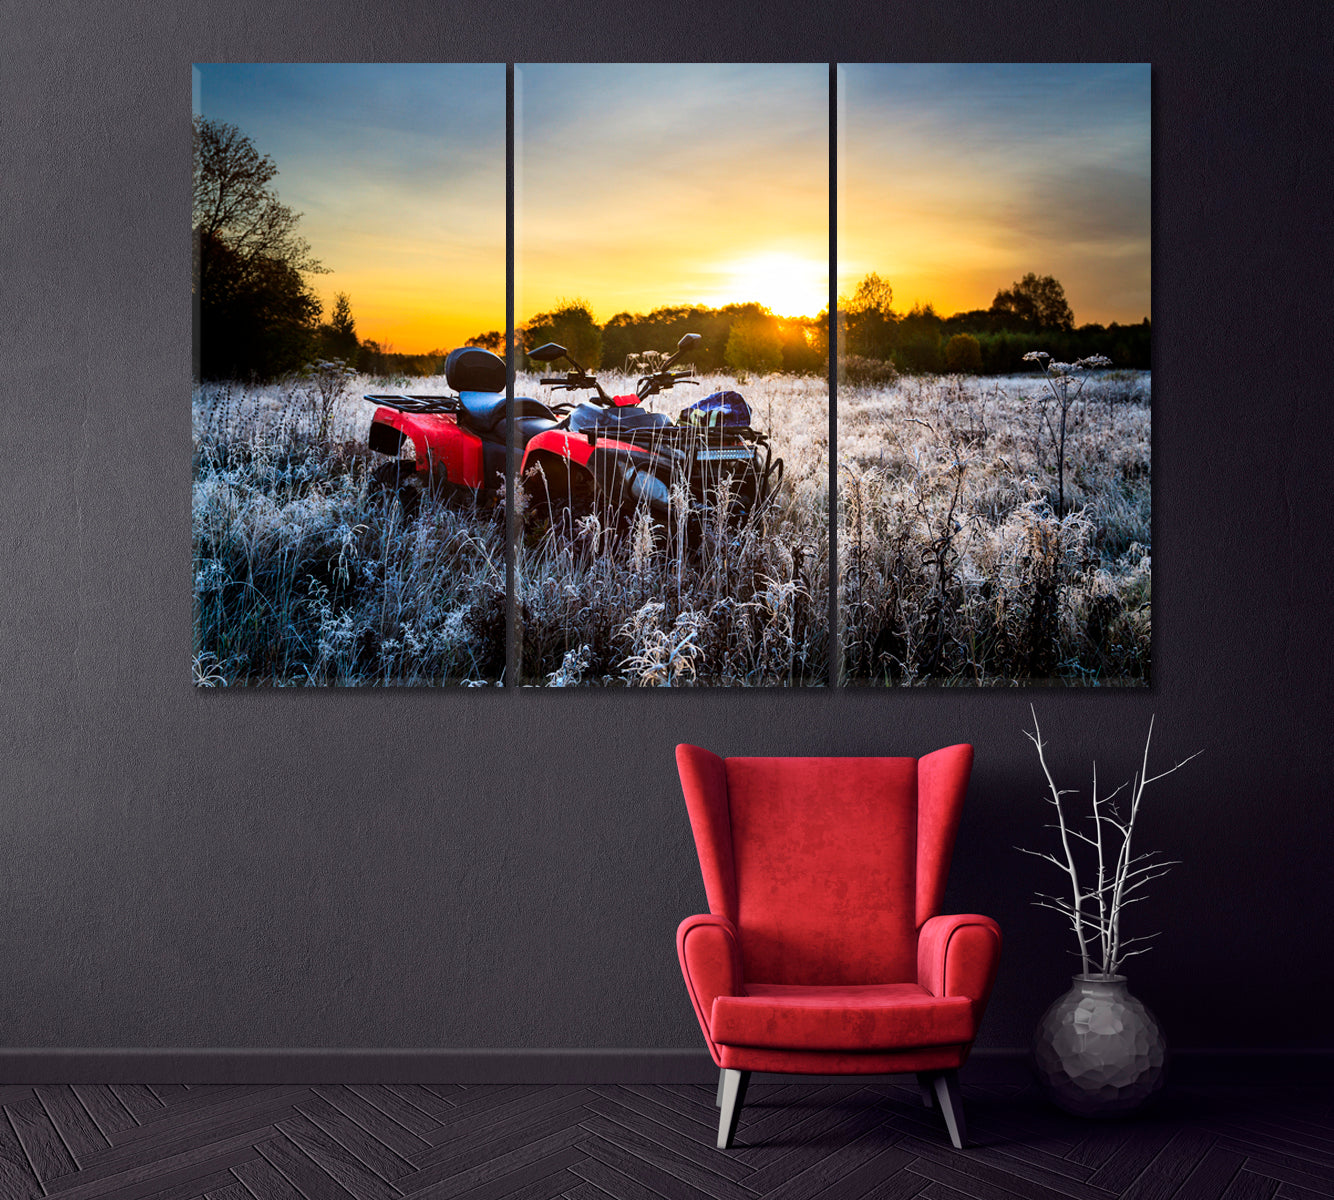 Quad Bike in Field at Sunrise Canvas Print ArtLexy 3 Panels 36"x24" inches 